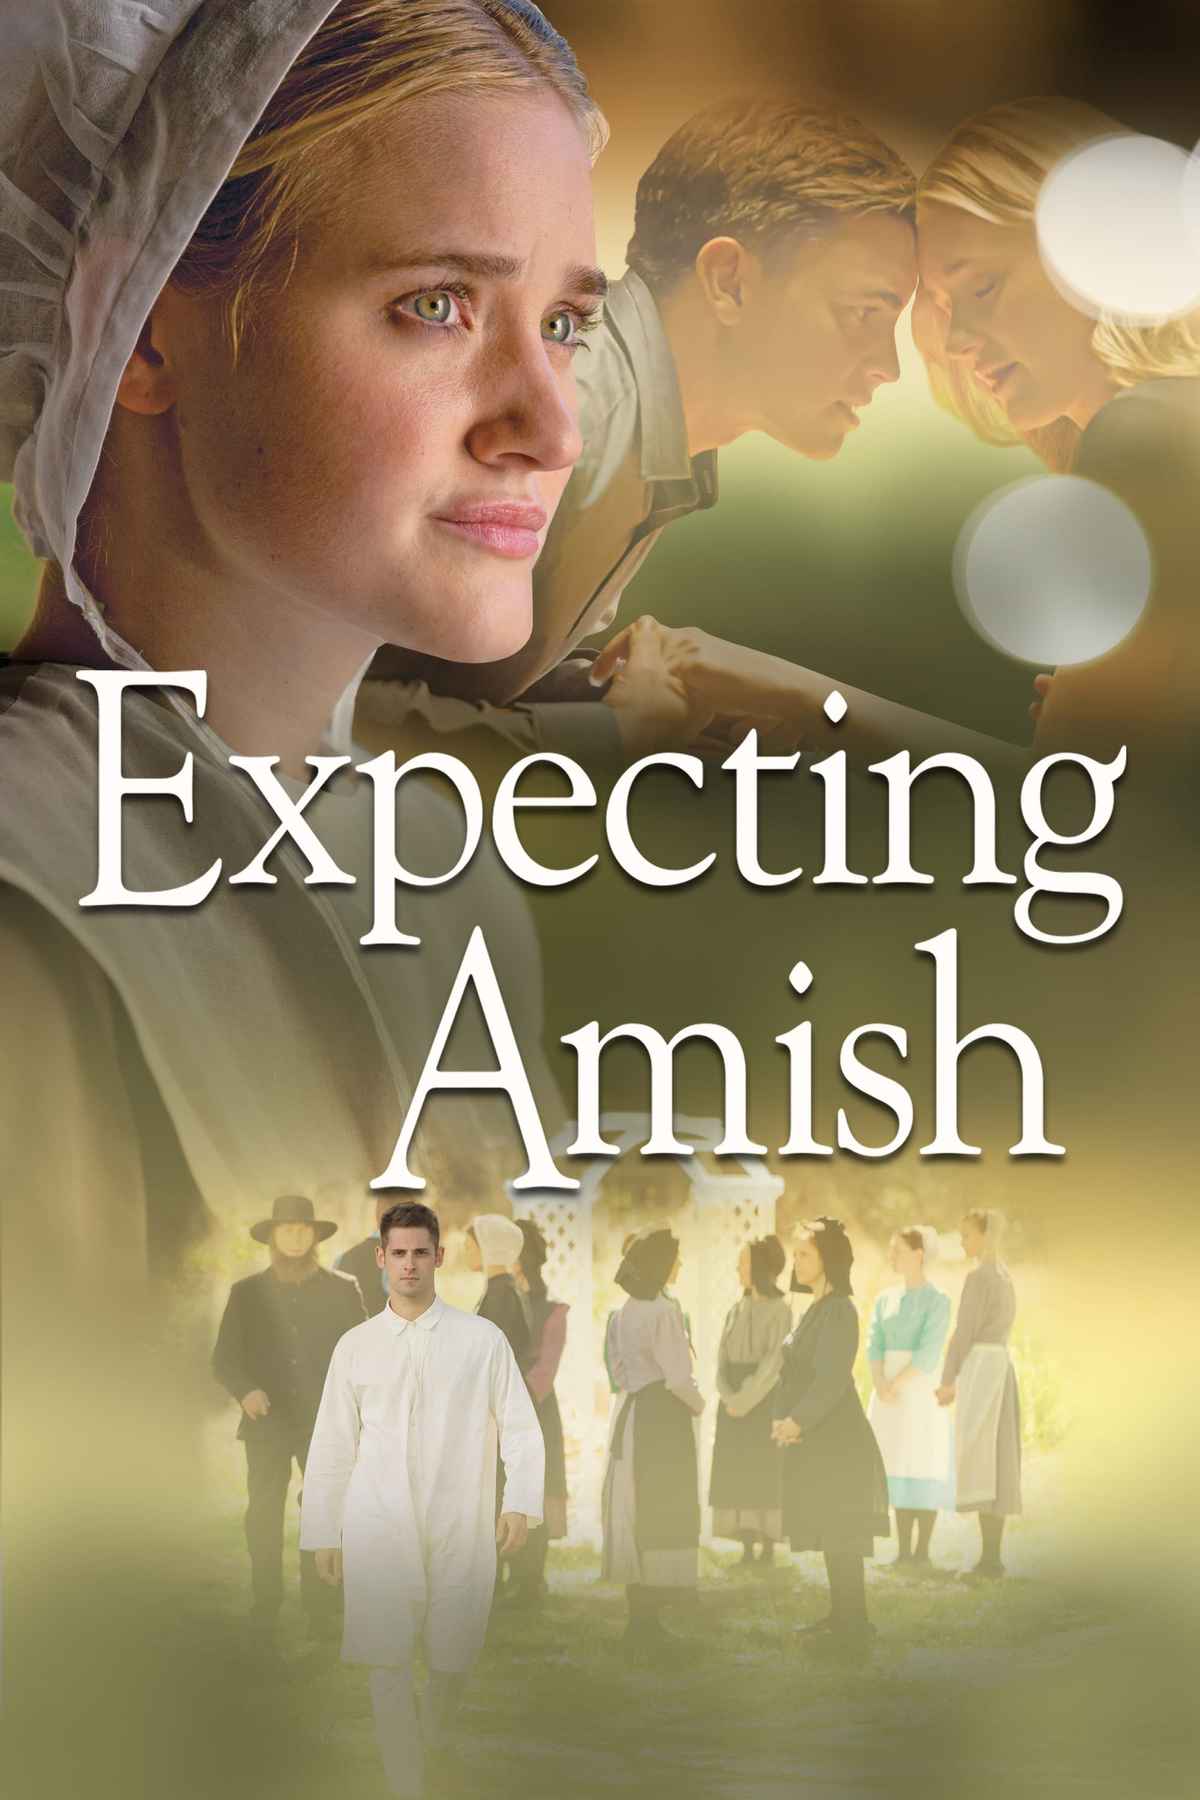 Expecting Amish Movie 2014 Release Date Cast Trailer Songs